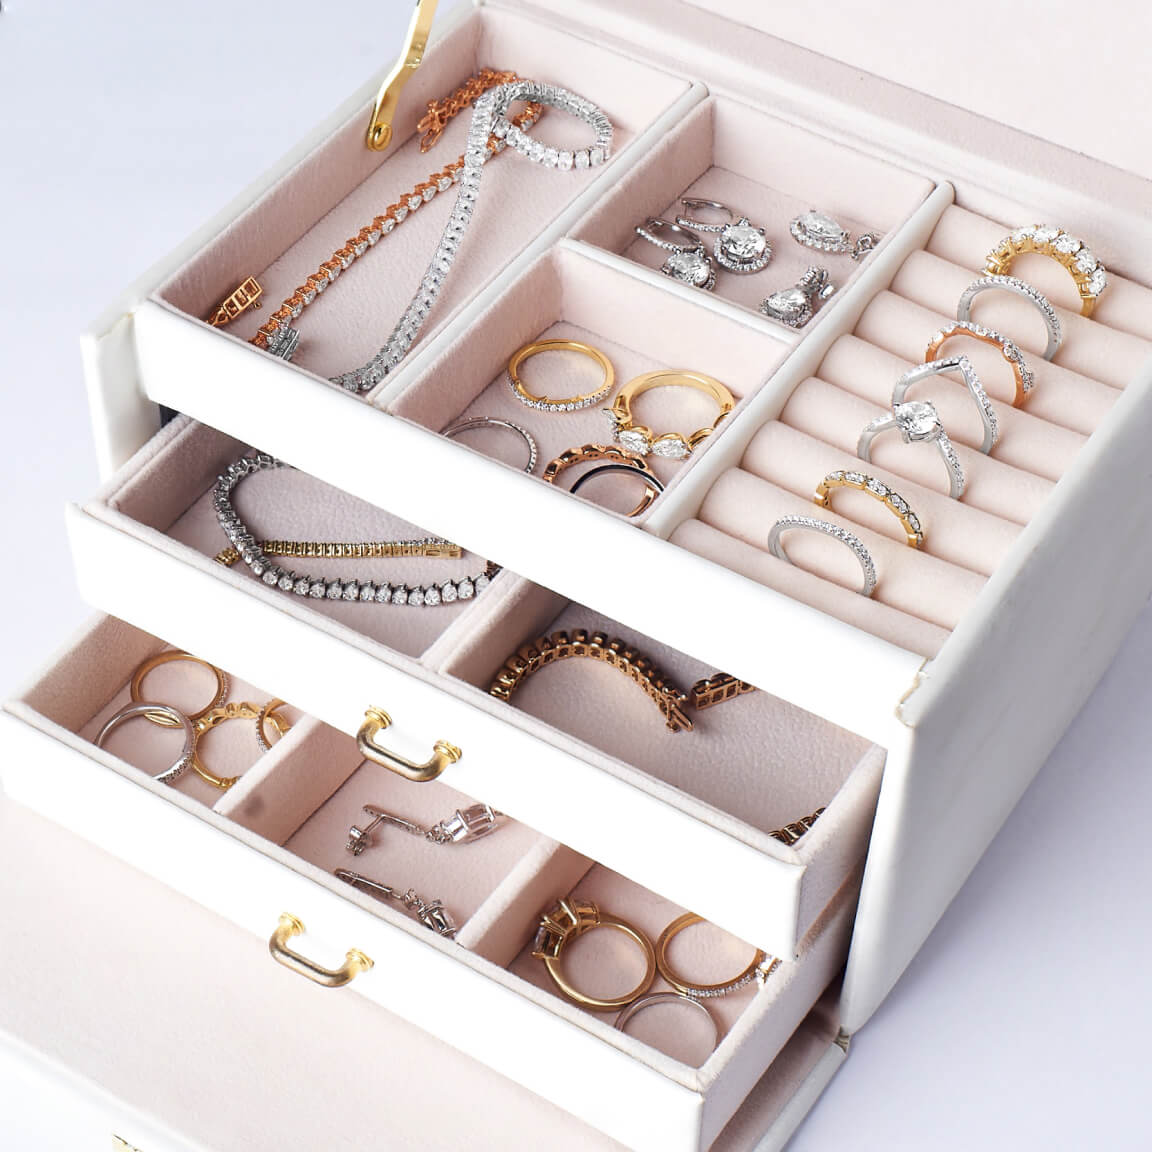 Diamond Jewelry Essentials You Must Have In Your Spring Wardrobe